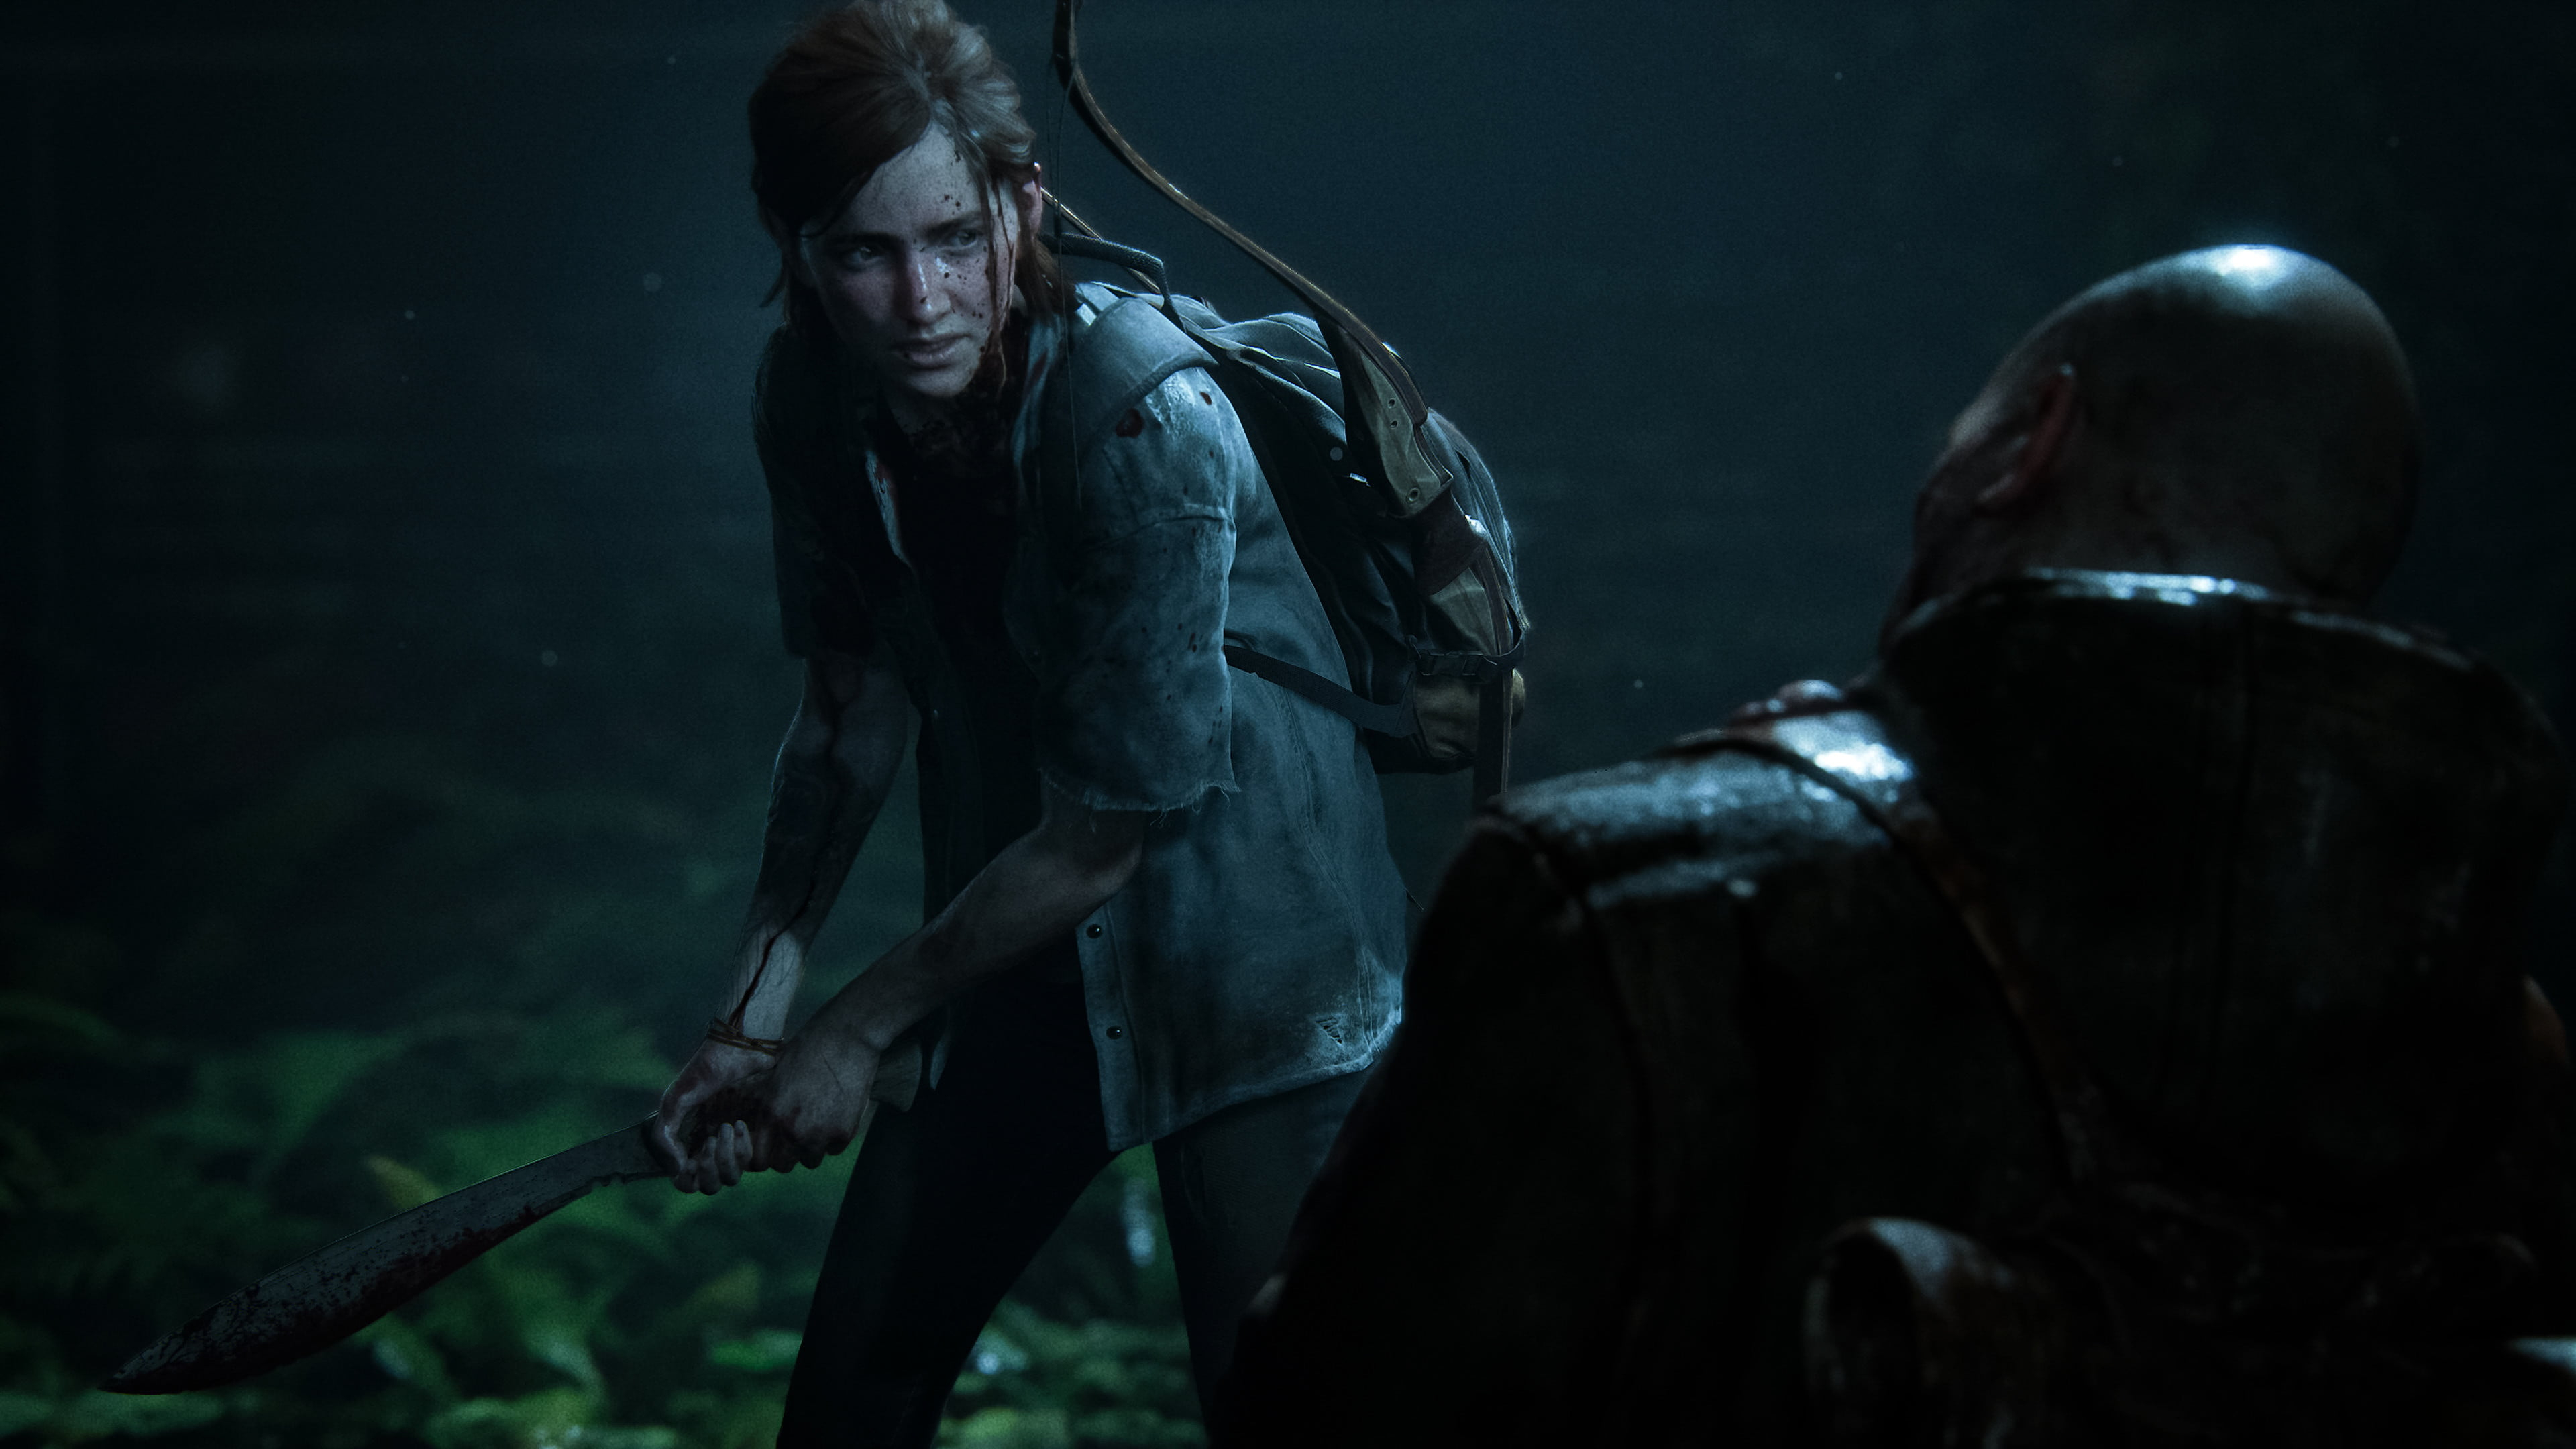 Do You Need to Play The Last of Us Before The Last of Us Part 2?